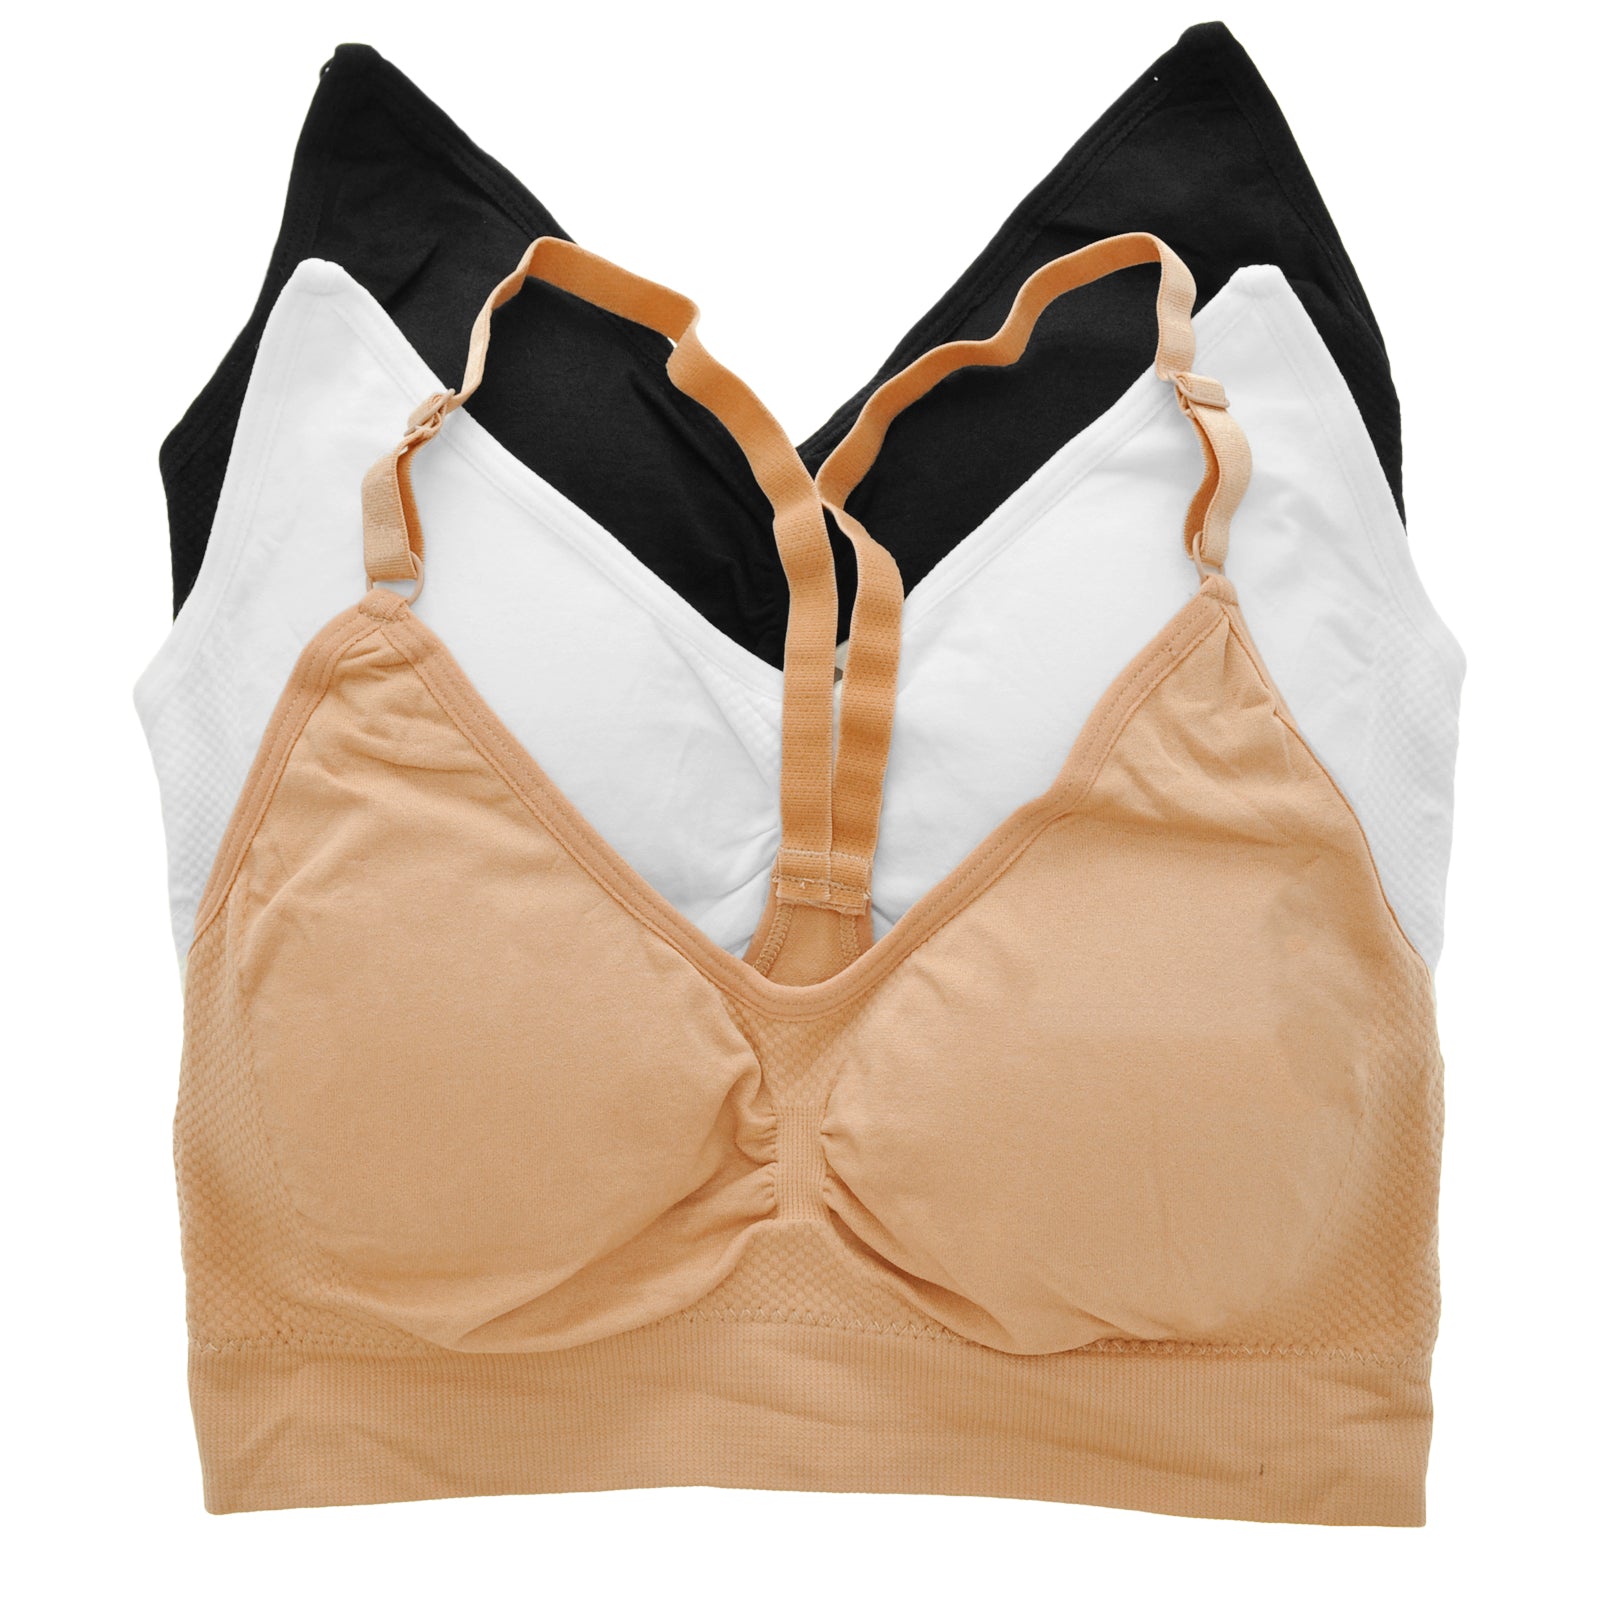 Buy Angelina 6 Pack Women's Seamless Racerback Sports Bra with